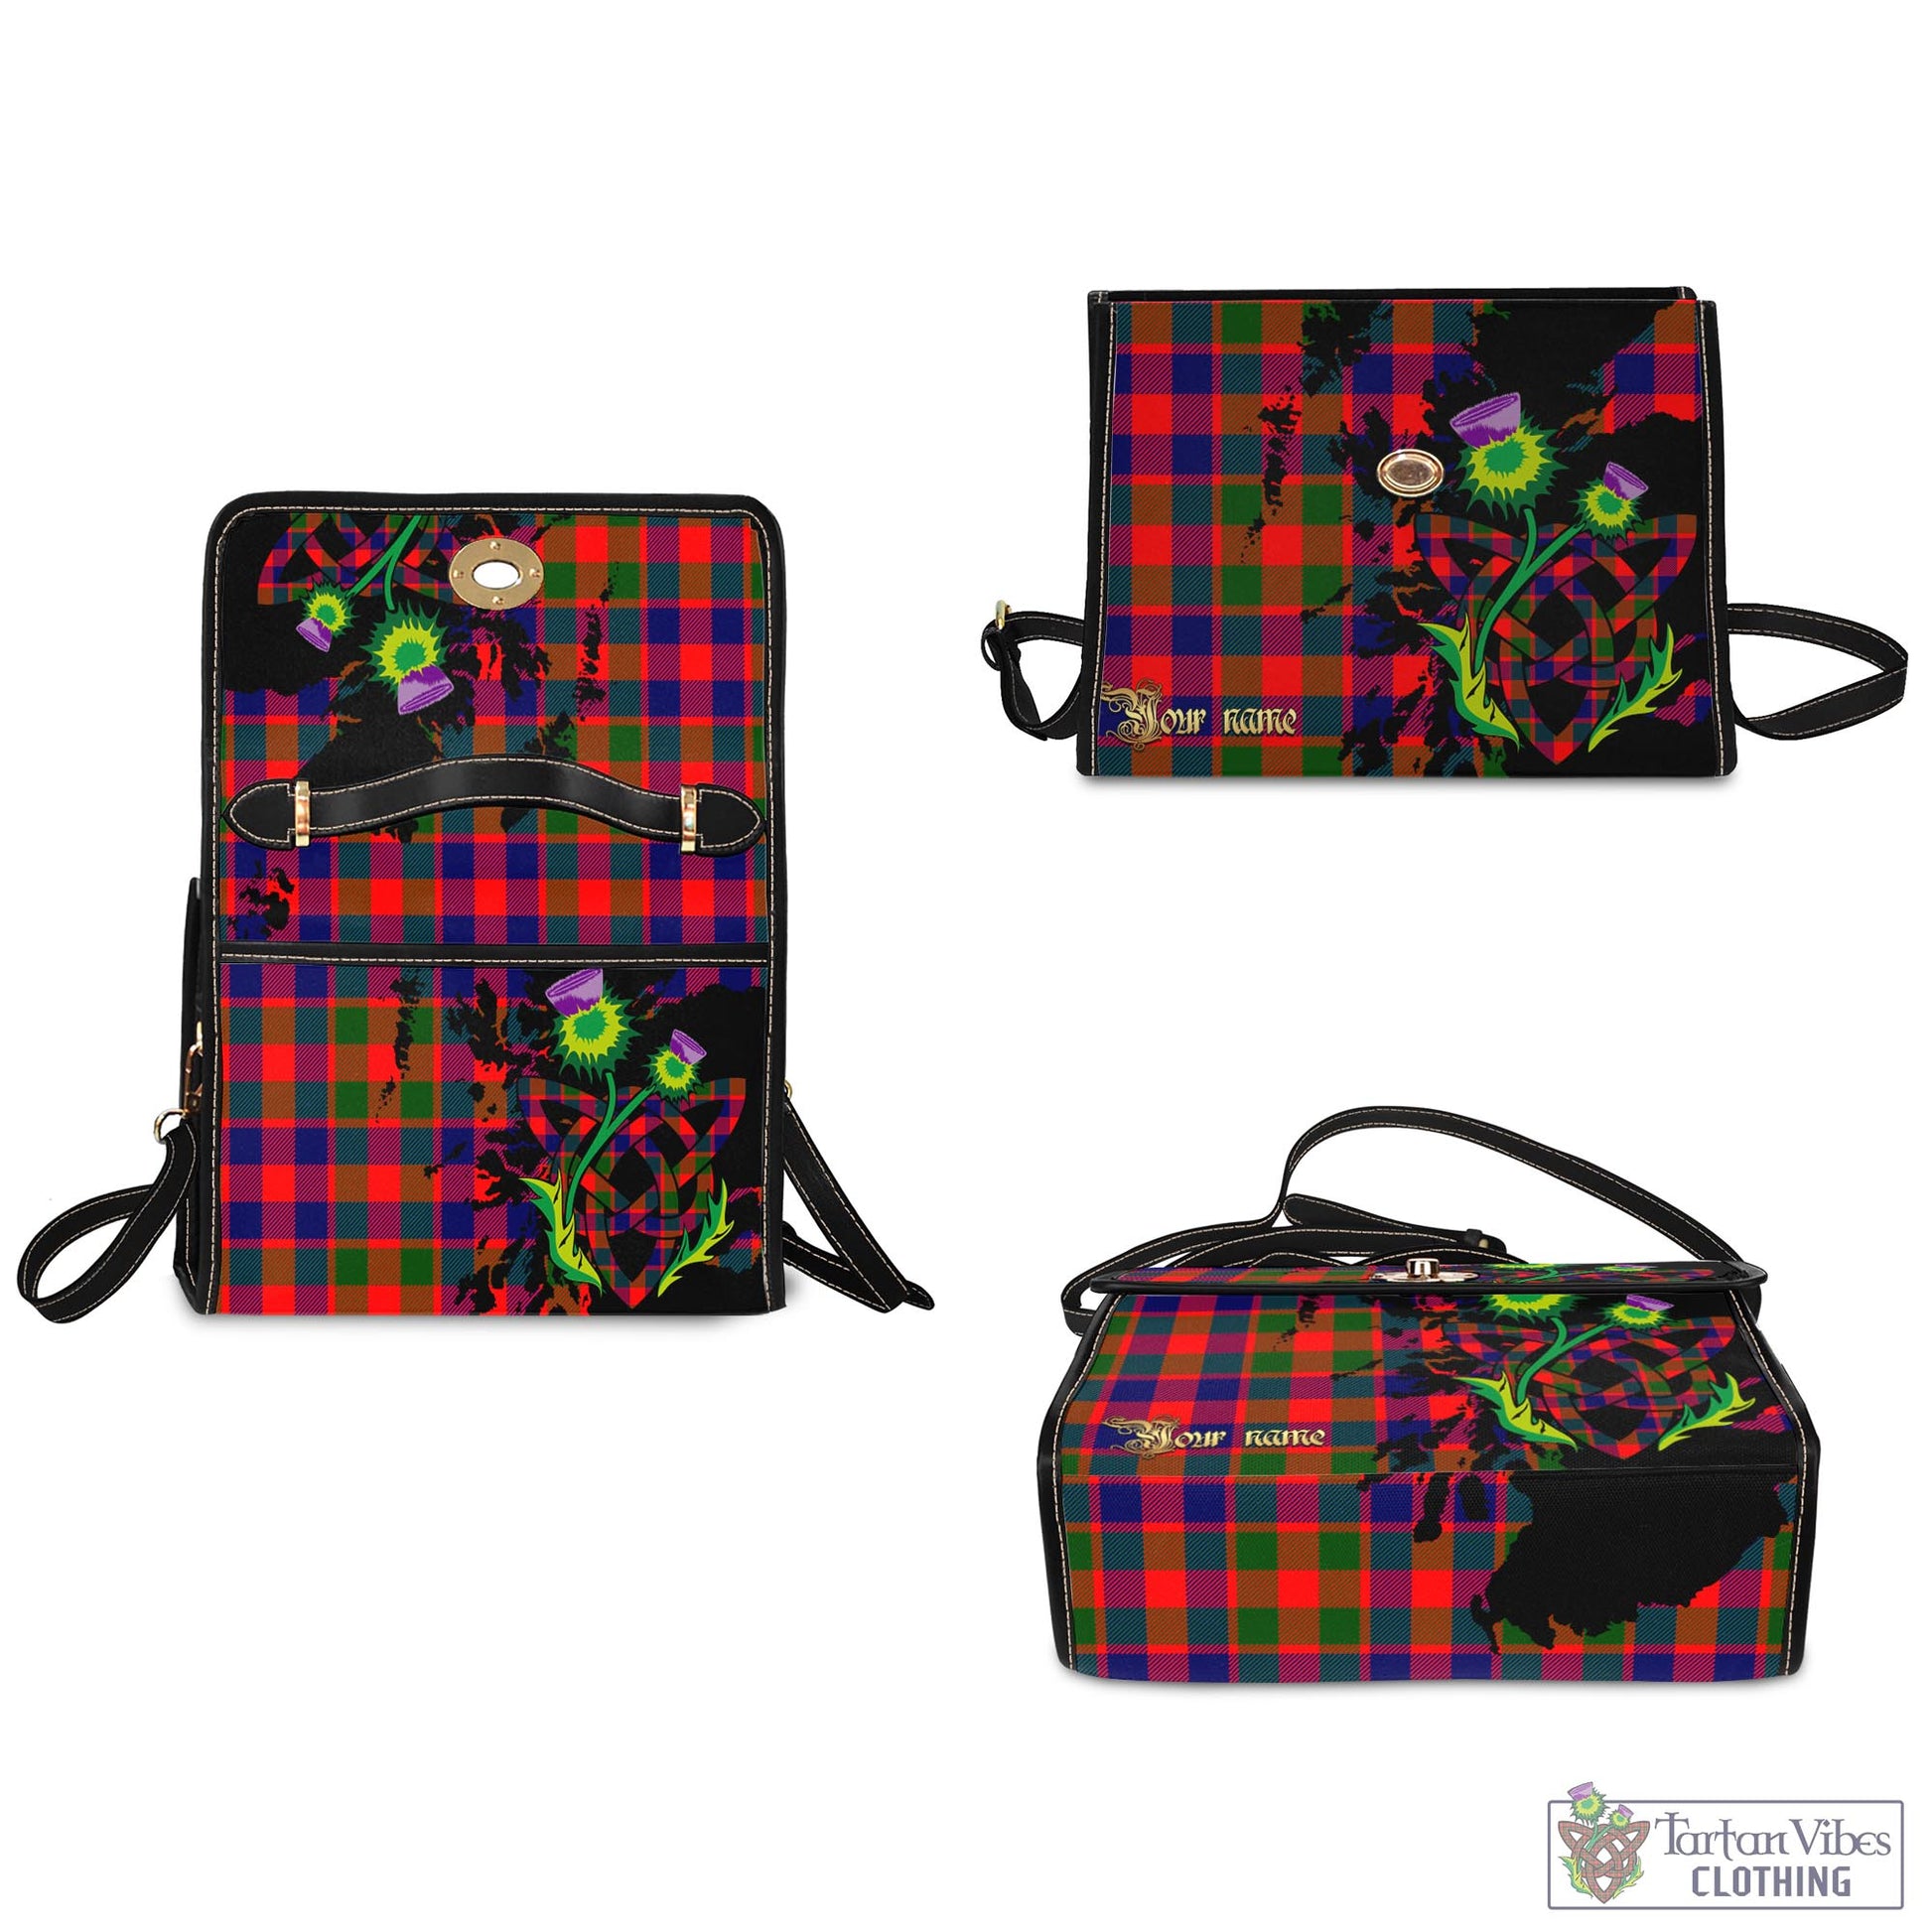 Tartan Vibes Clothing Gow of Skeoch Tartan Waterproof Canvas Bag with Scotland Map and Thistle Celtic Accents